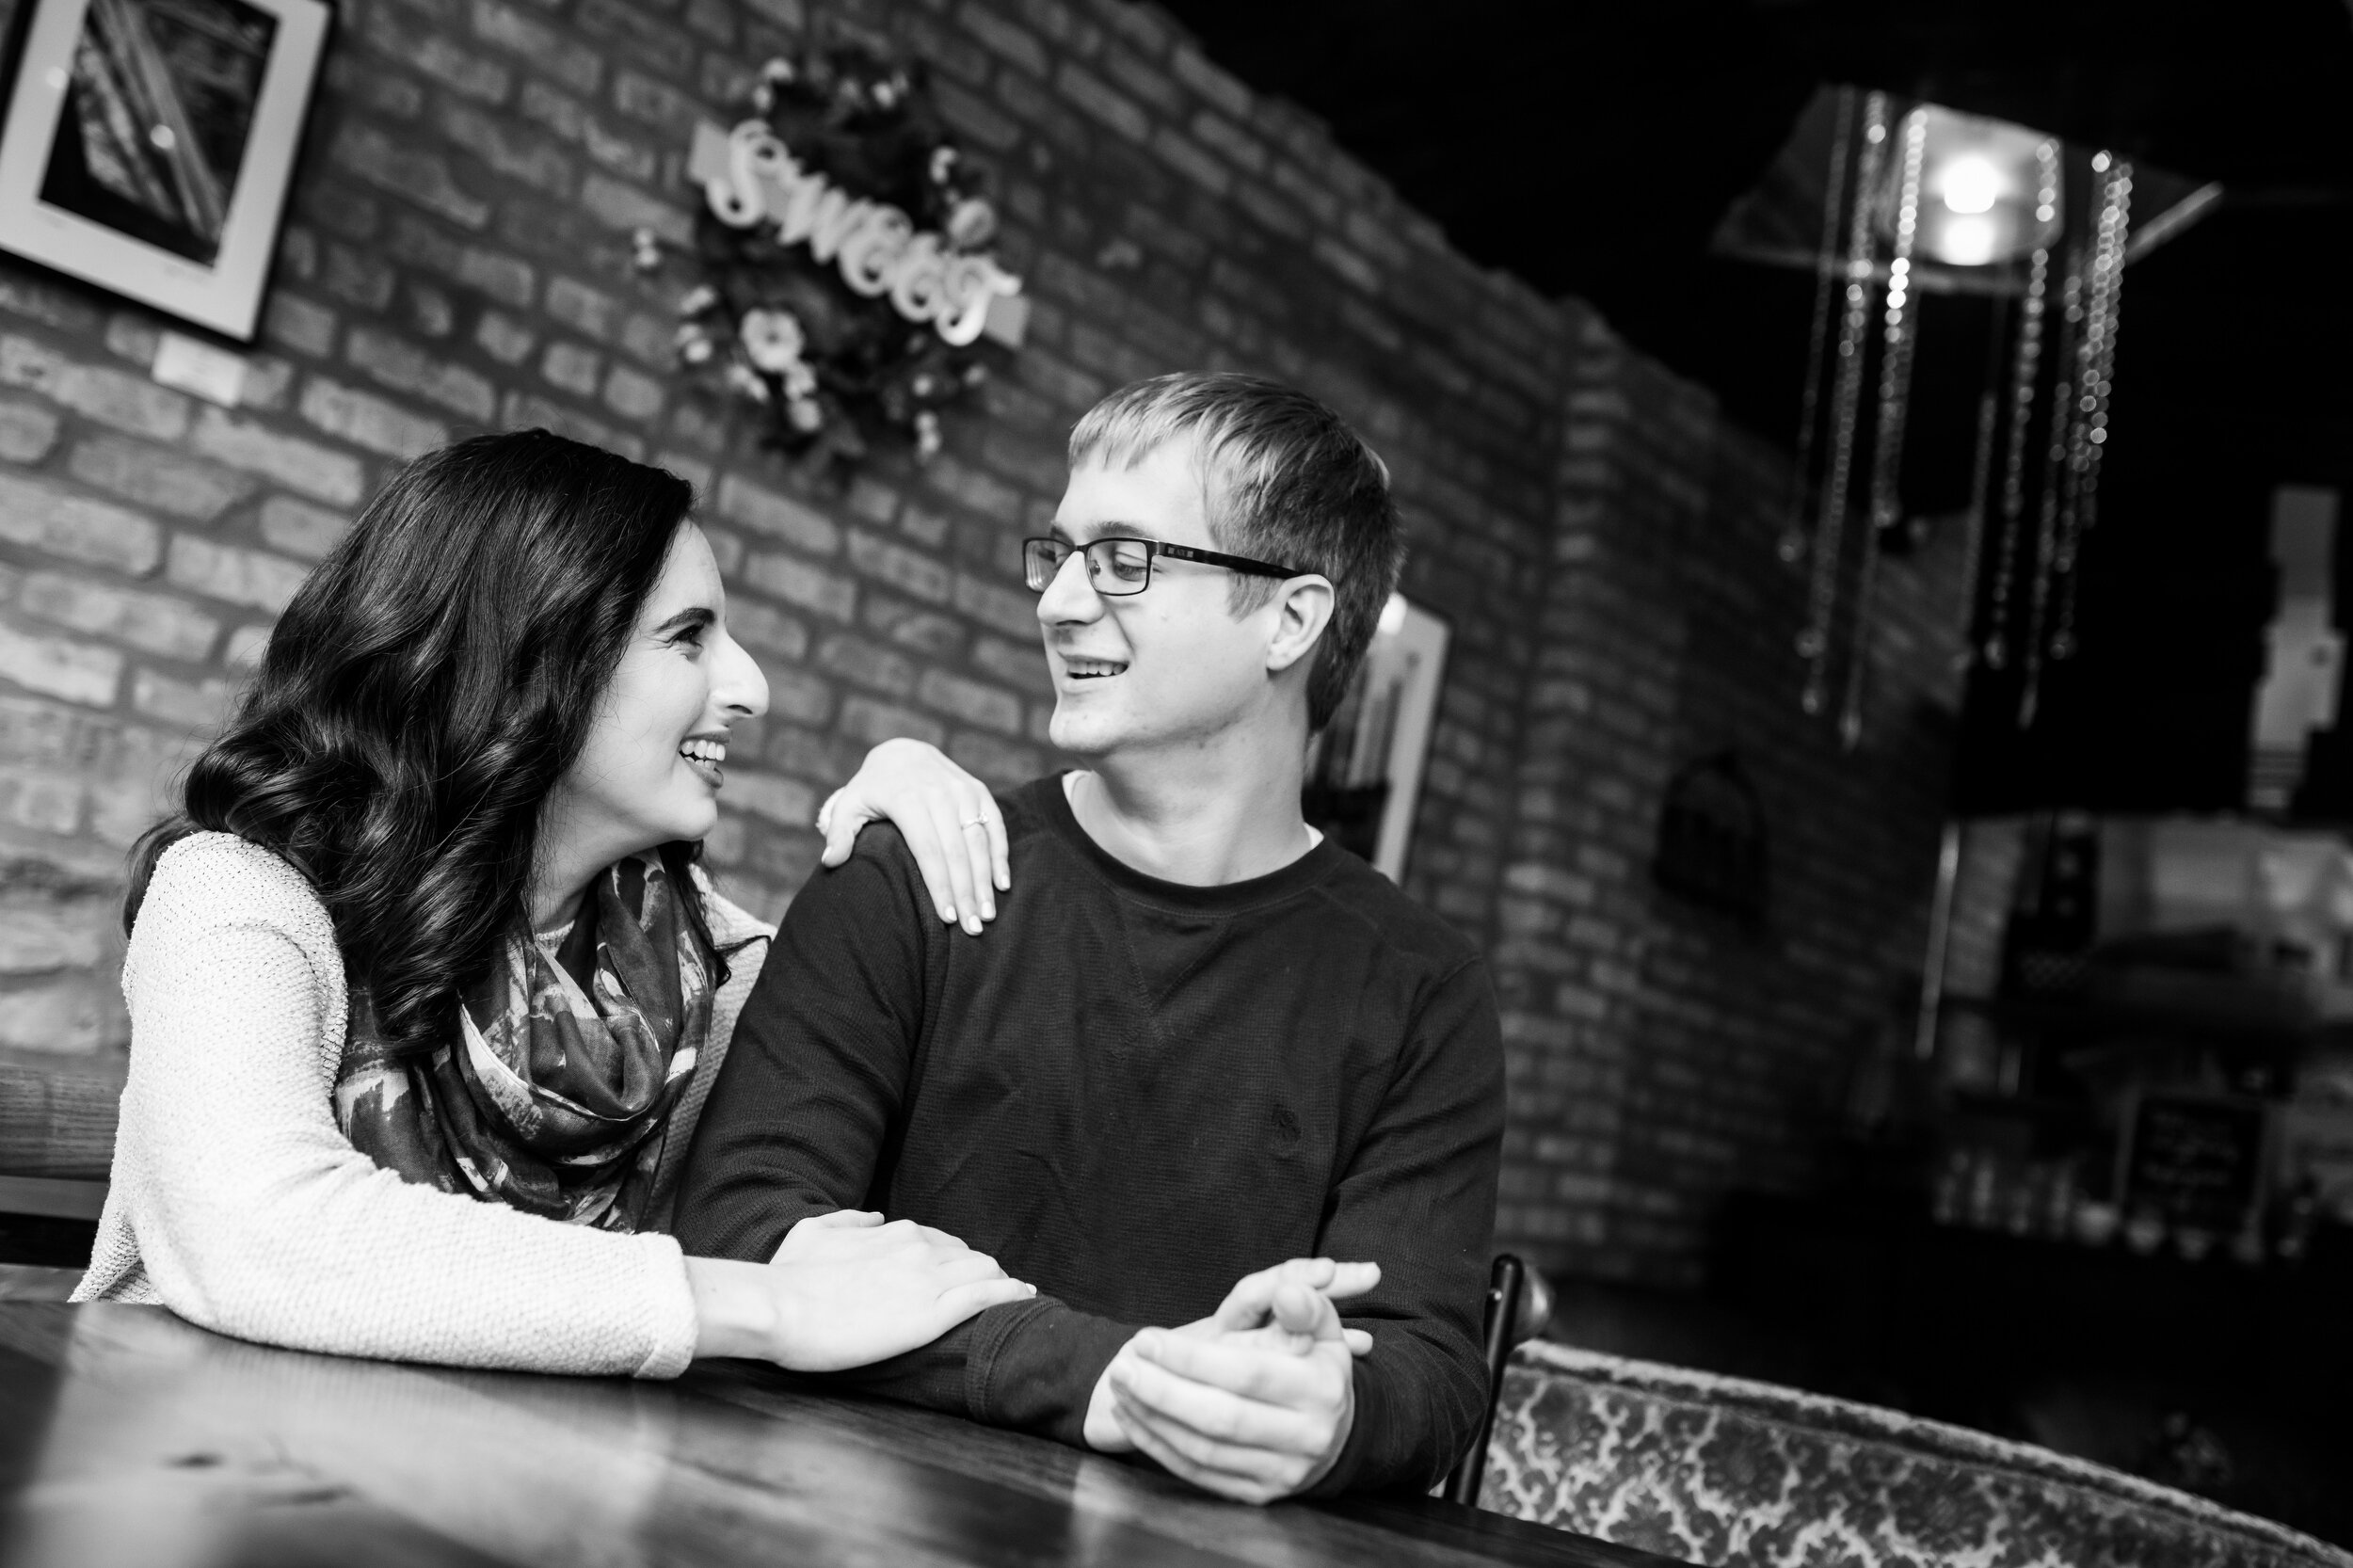 Fun Chicago engagement session at Katherine Anne Confections.